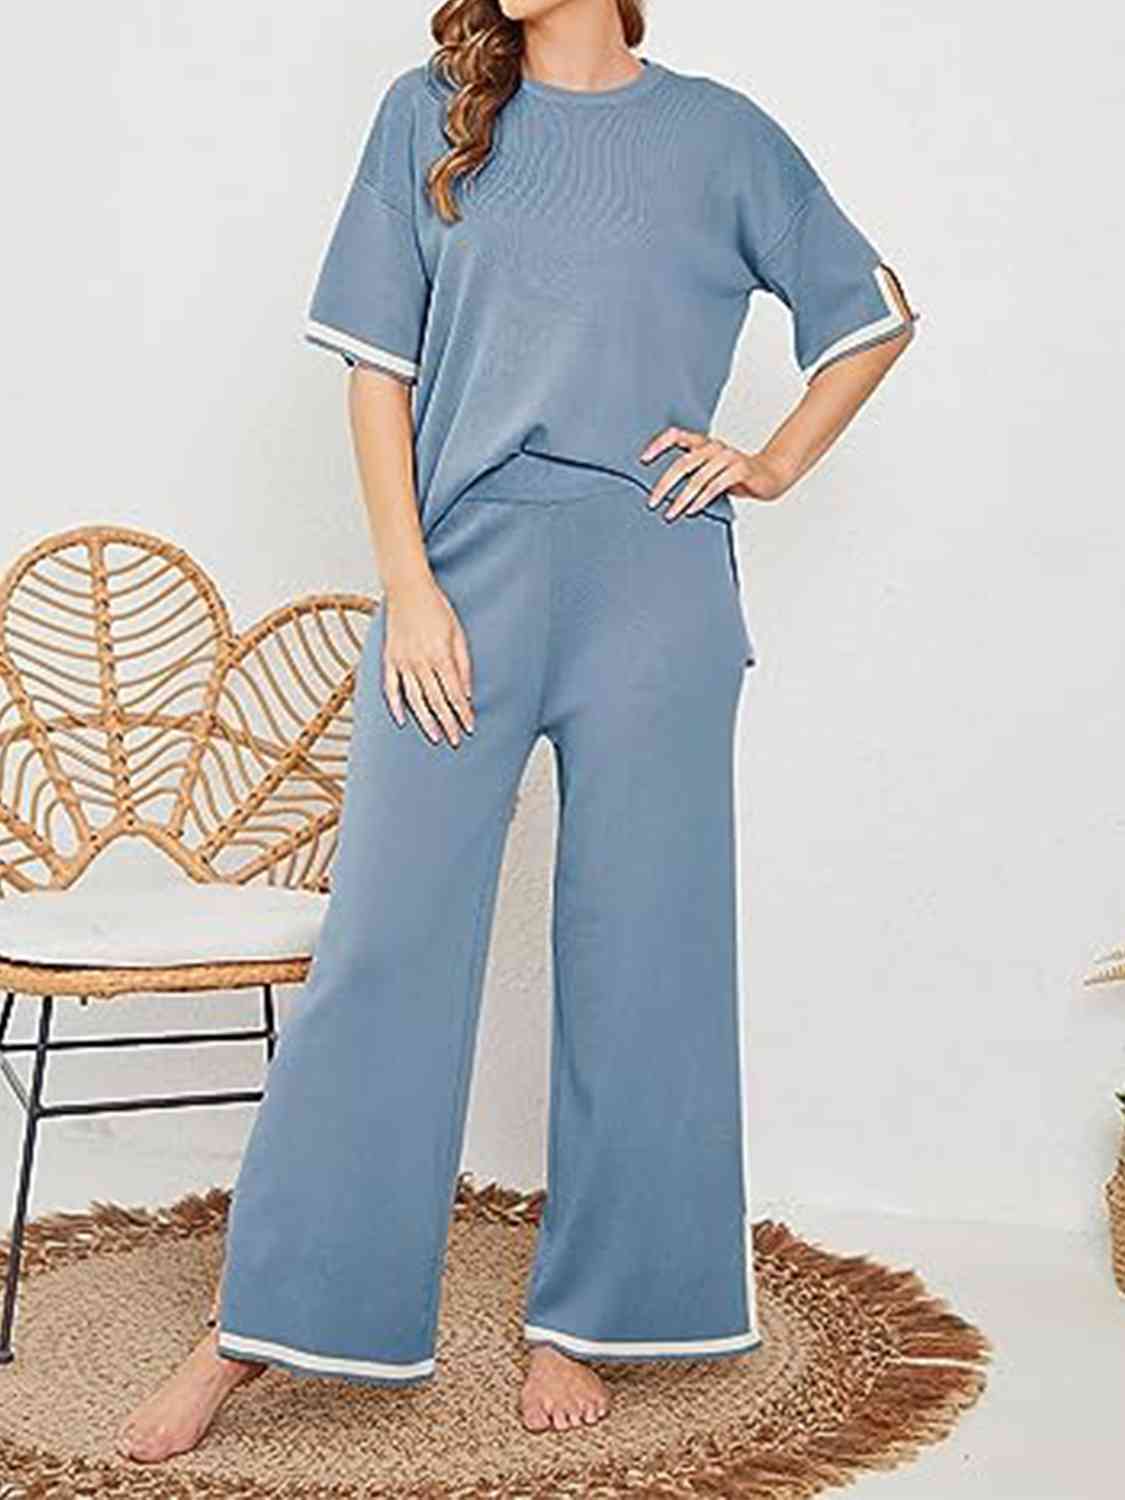 Women's Contrast High-Low Sweater and Knit Pants Set Misty Blue